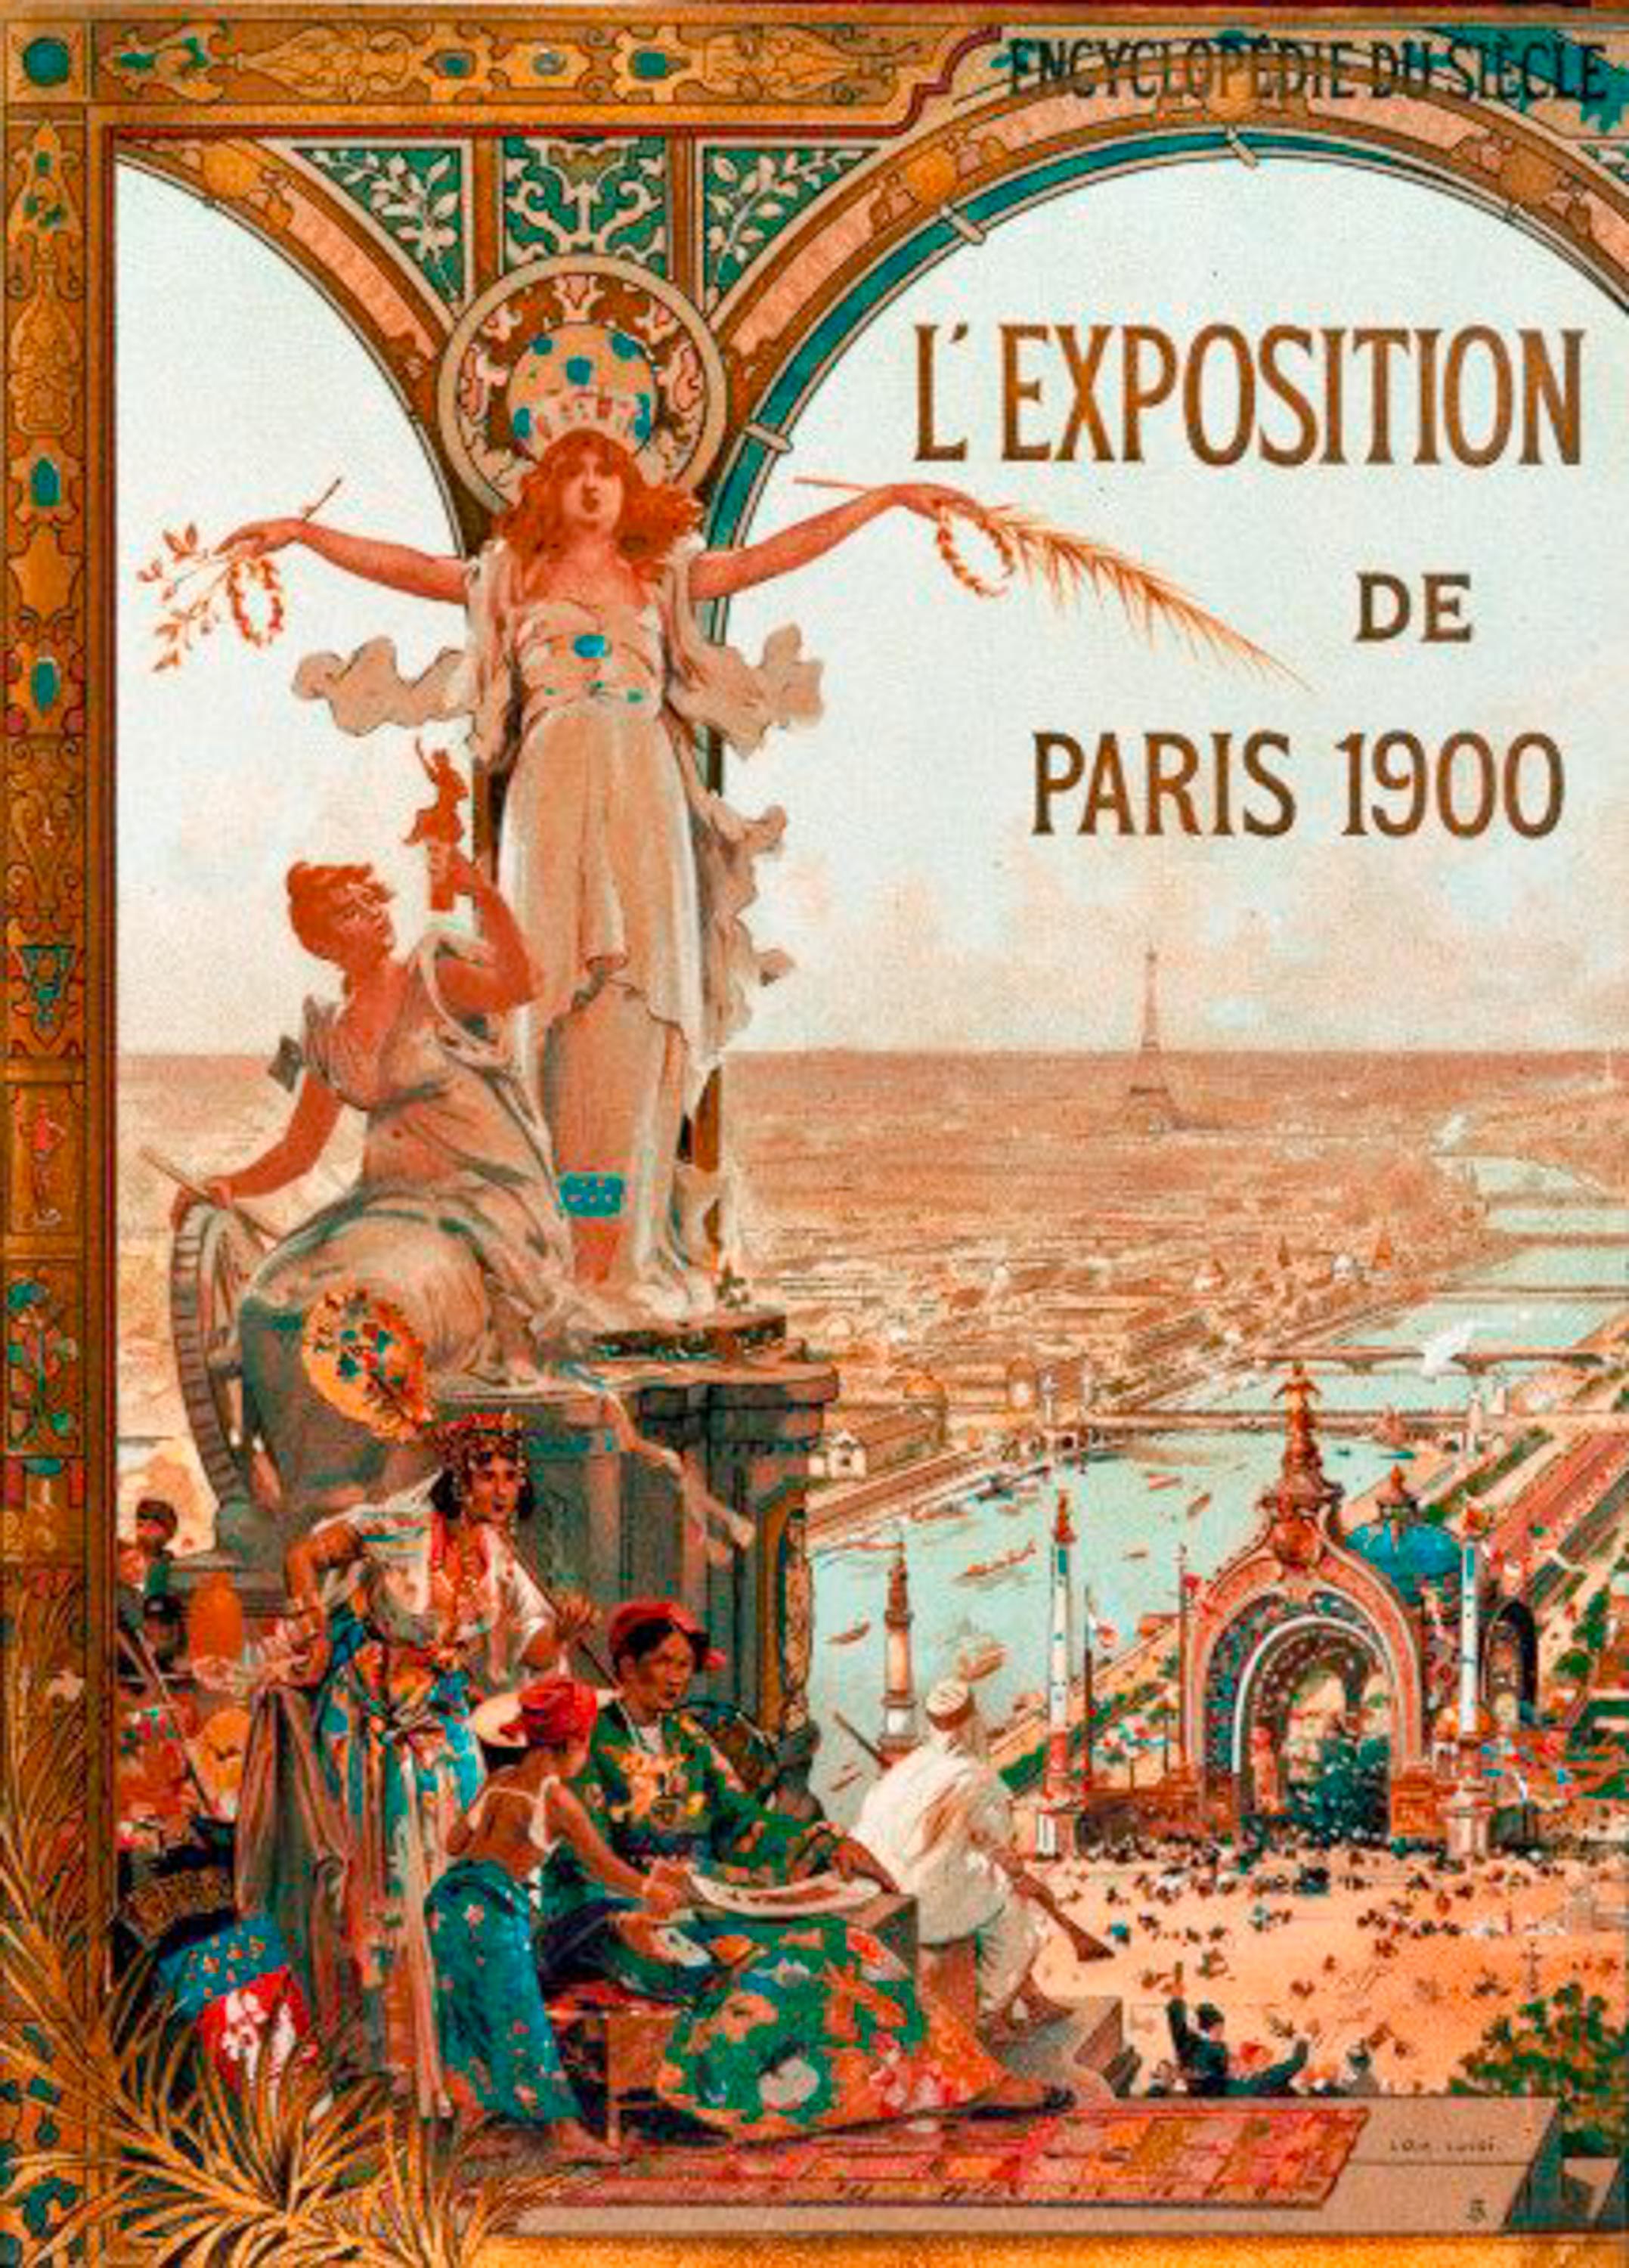 Rare antique Victorian silver plated and brass souvenir miniature book charm of the Exposition of Paris in France in 1900. The charm showcases a tiny black and white photo album of some pavilions during the fair. The photos are a bit faded and foxed